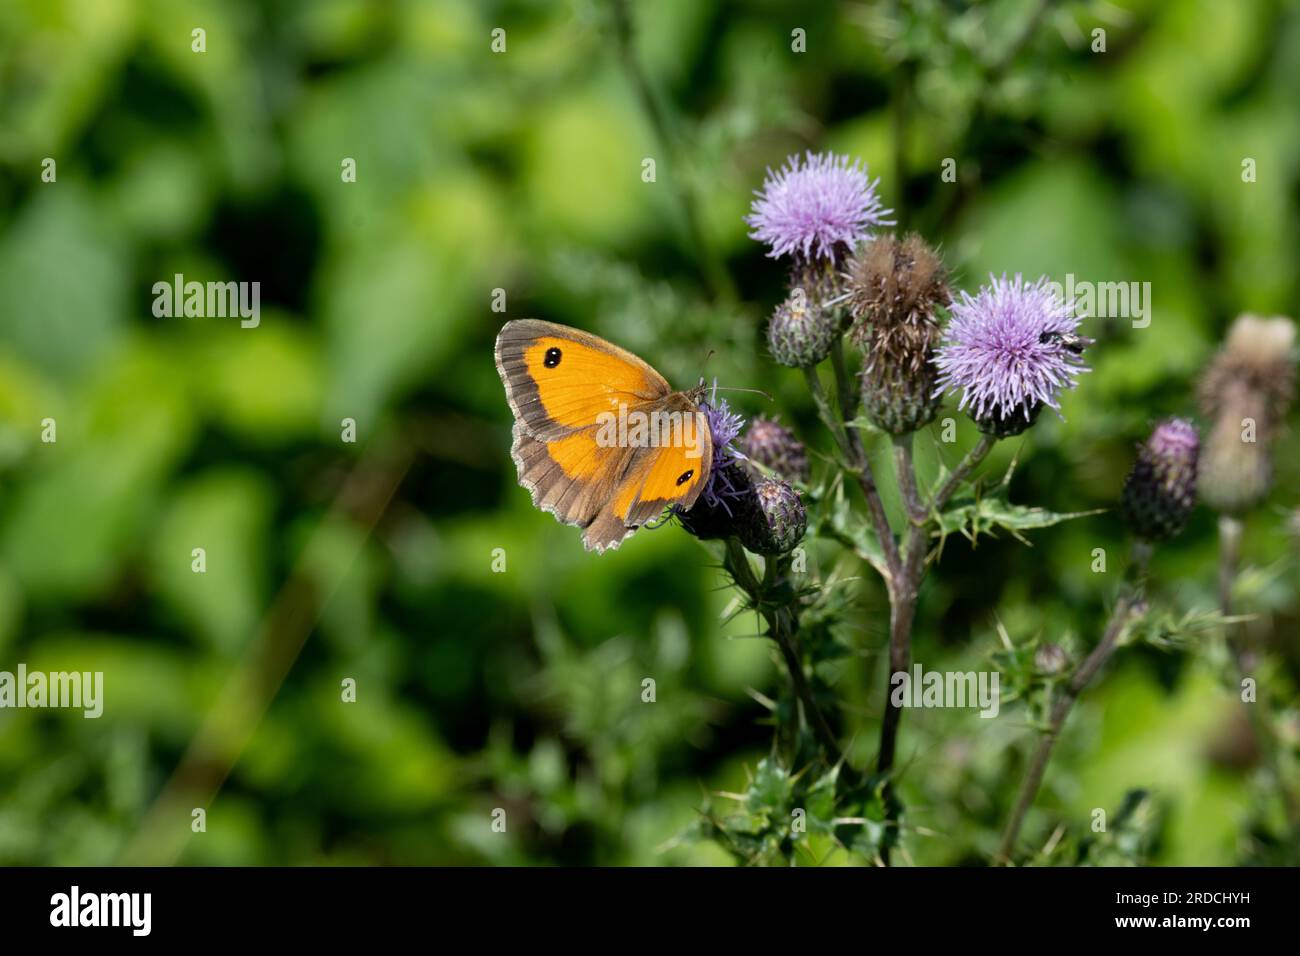 Hedge Brown or Gatekeeper butterfly (Pyronia tithonus) on a thistle flower, Warwickshire, UK Stock Photo